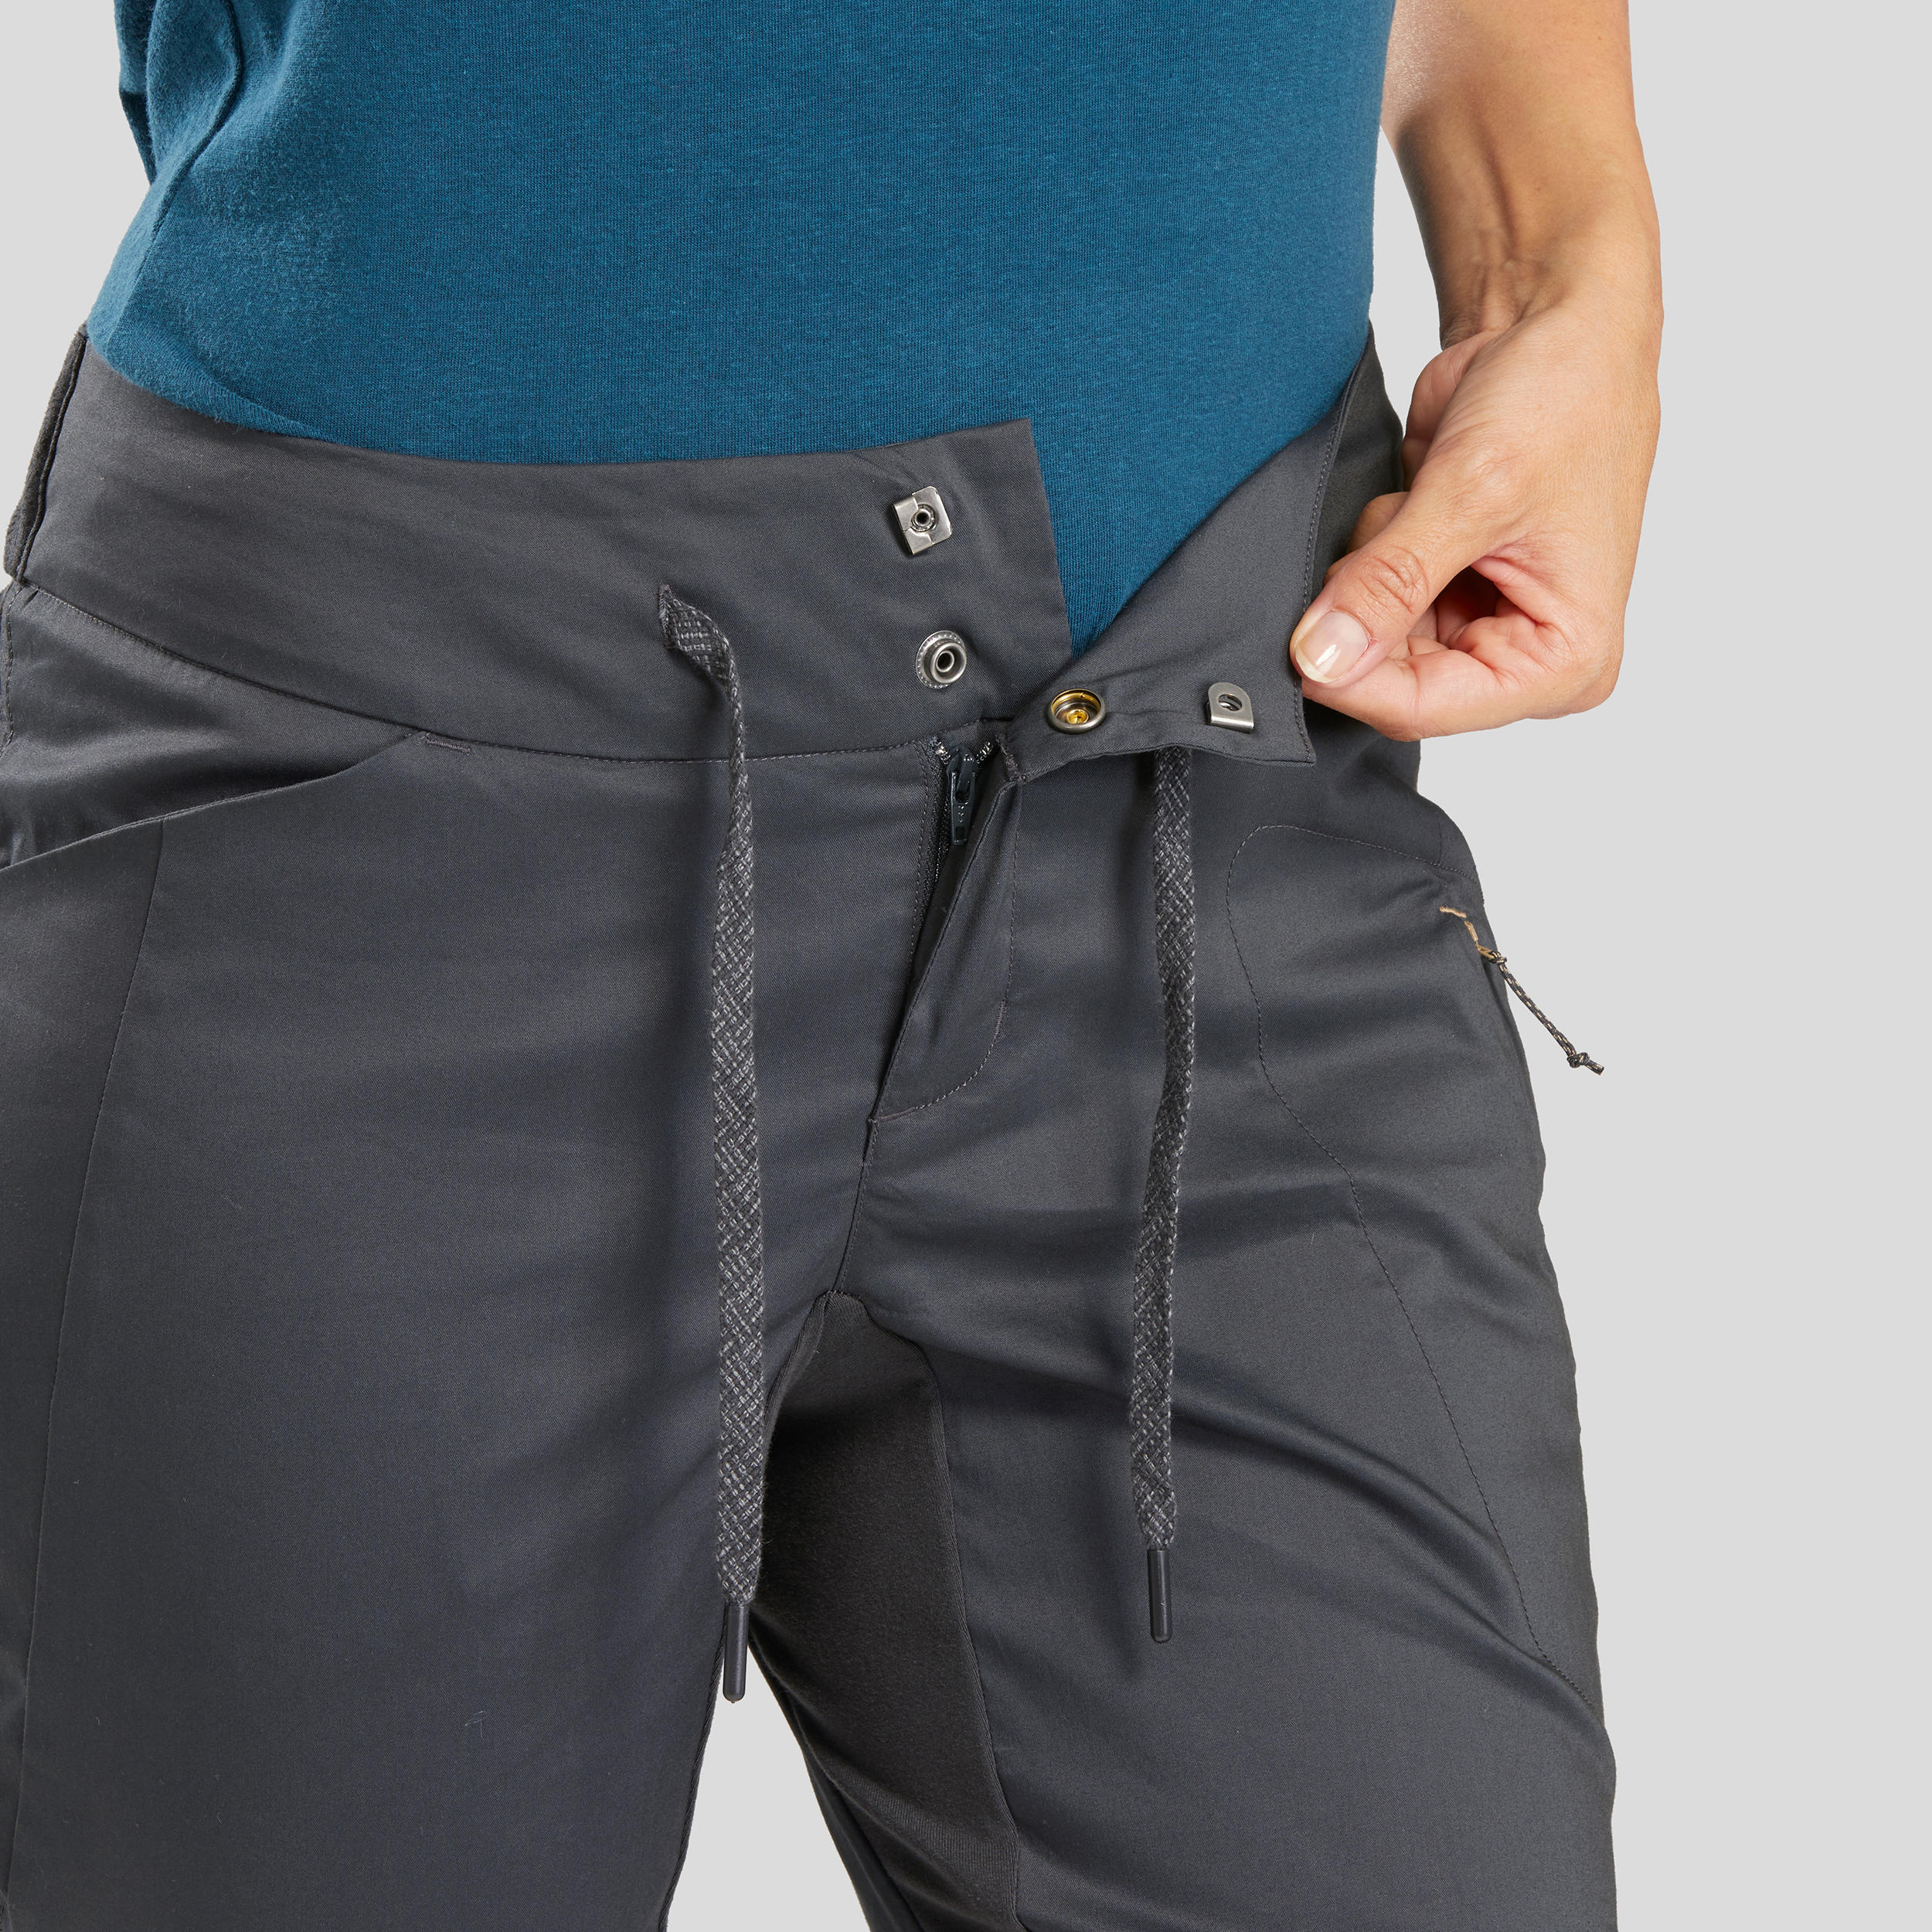 Decathlon Quechua NH500 Fresh, Cropped Hiking Pants, Women's Fashion,  Activewear on Carousell